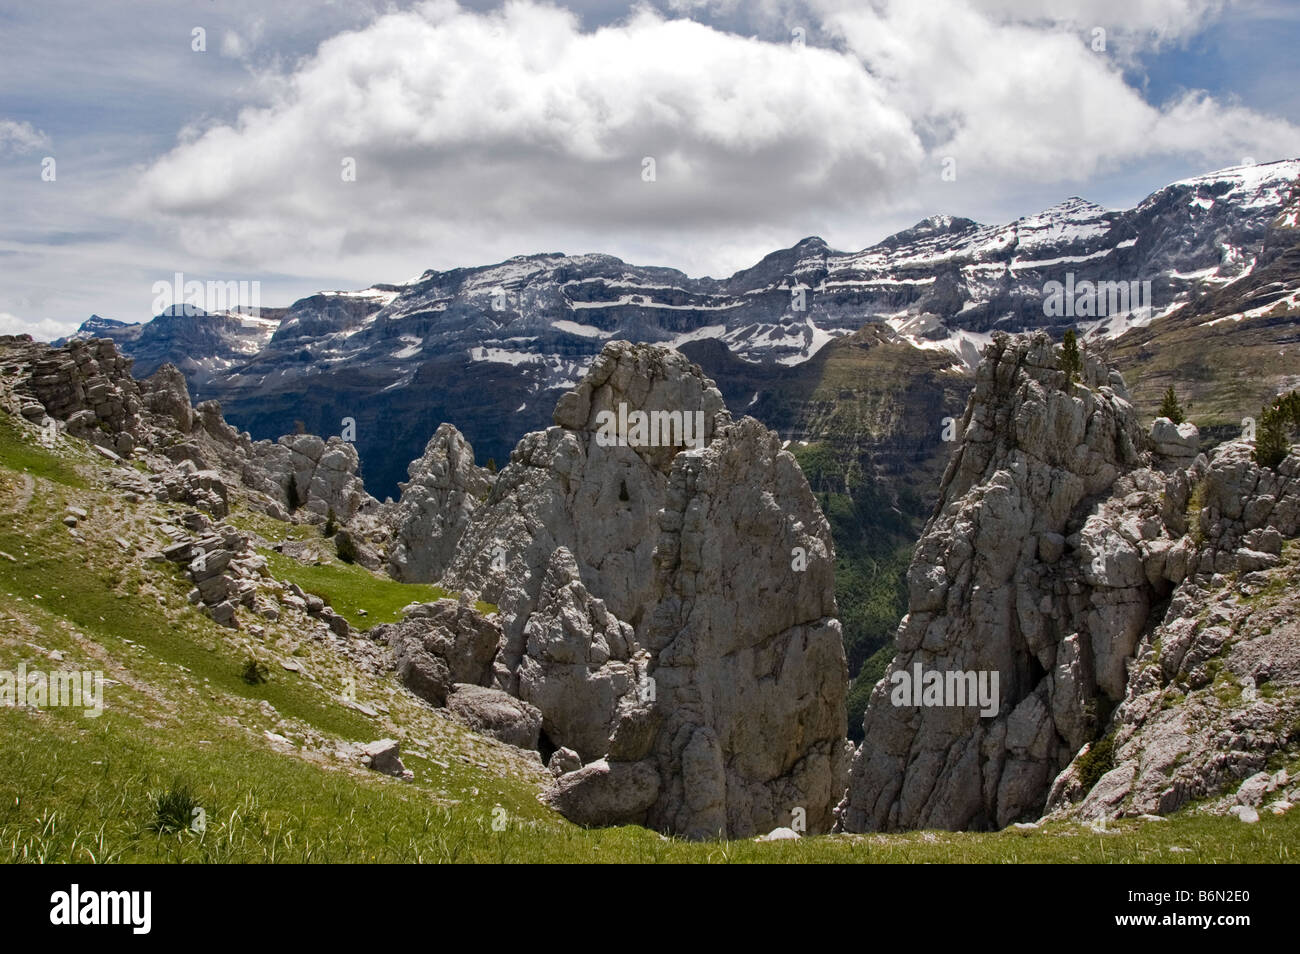 Descent to the Pineta valley Huesca Pyrenees Spain the mountain range that separates Spain and France Stock Photo